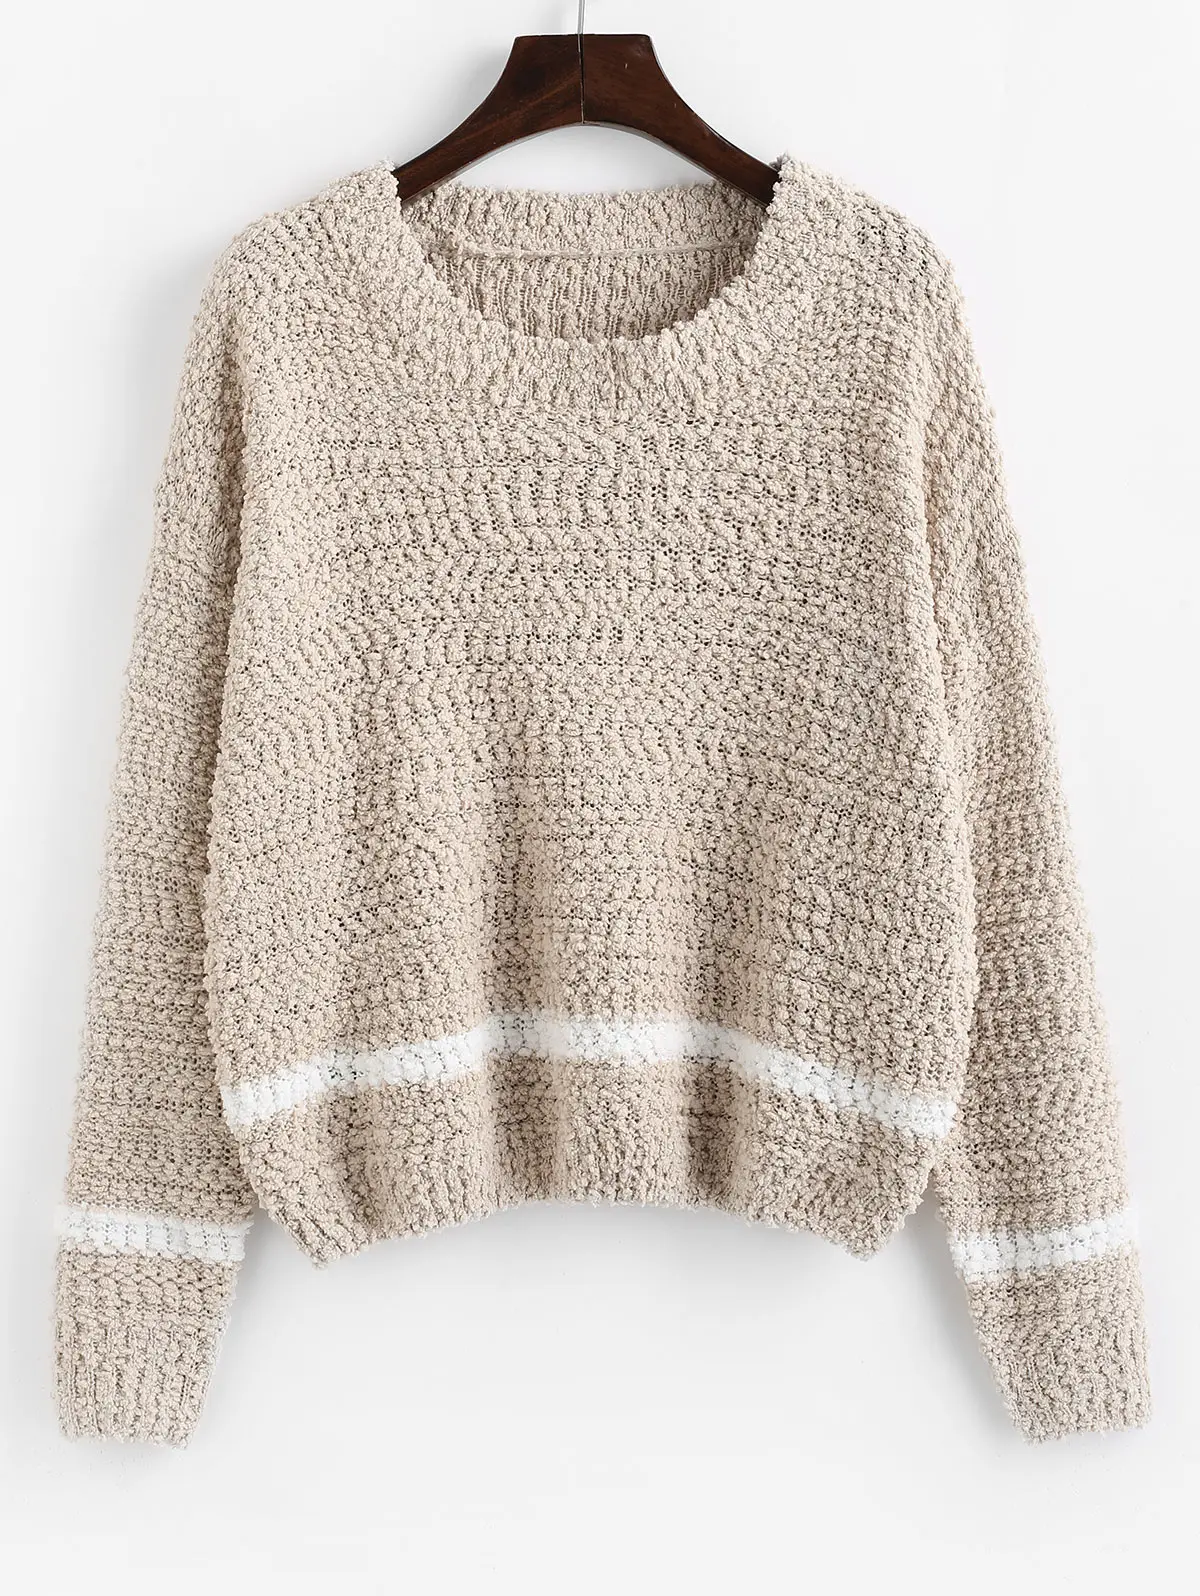 

ZAFUL Contrast Trim Textured Boucle Knit Sweater Women Drop Shoulder Round Neck Pullover Spring Autumn Long Sleeve Jumper Casual